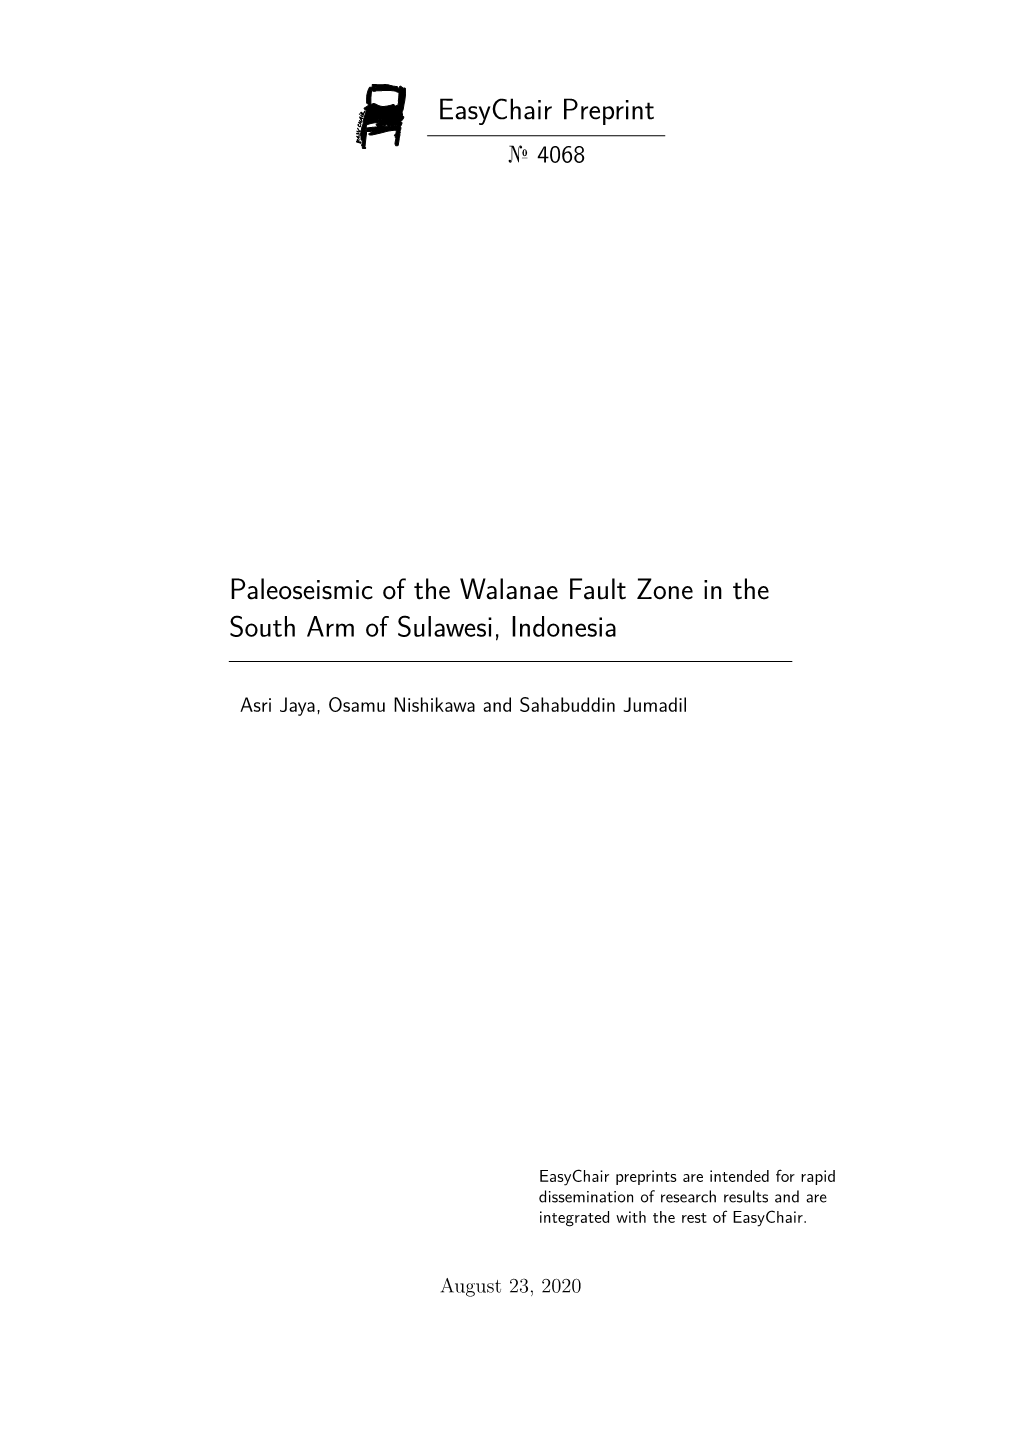 Paleoseismic of the Walanae Fault Zone in the South Arm of Sulawesi, Indonesia